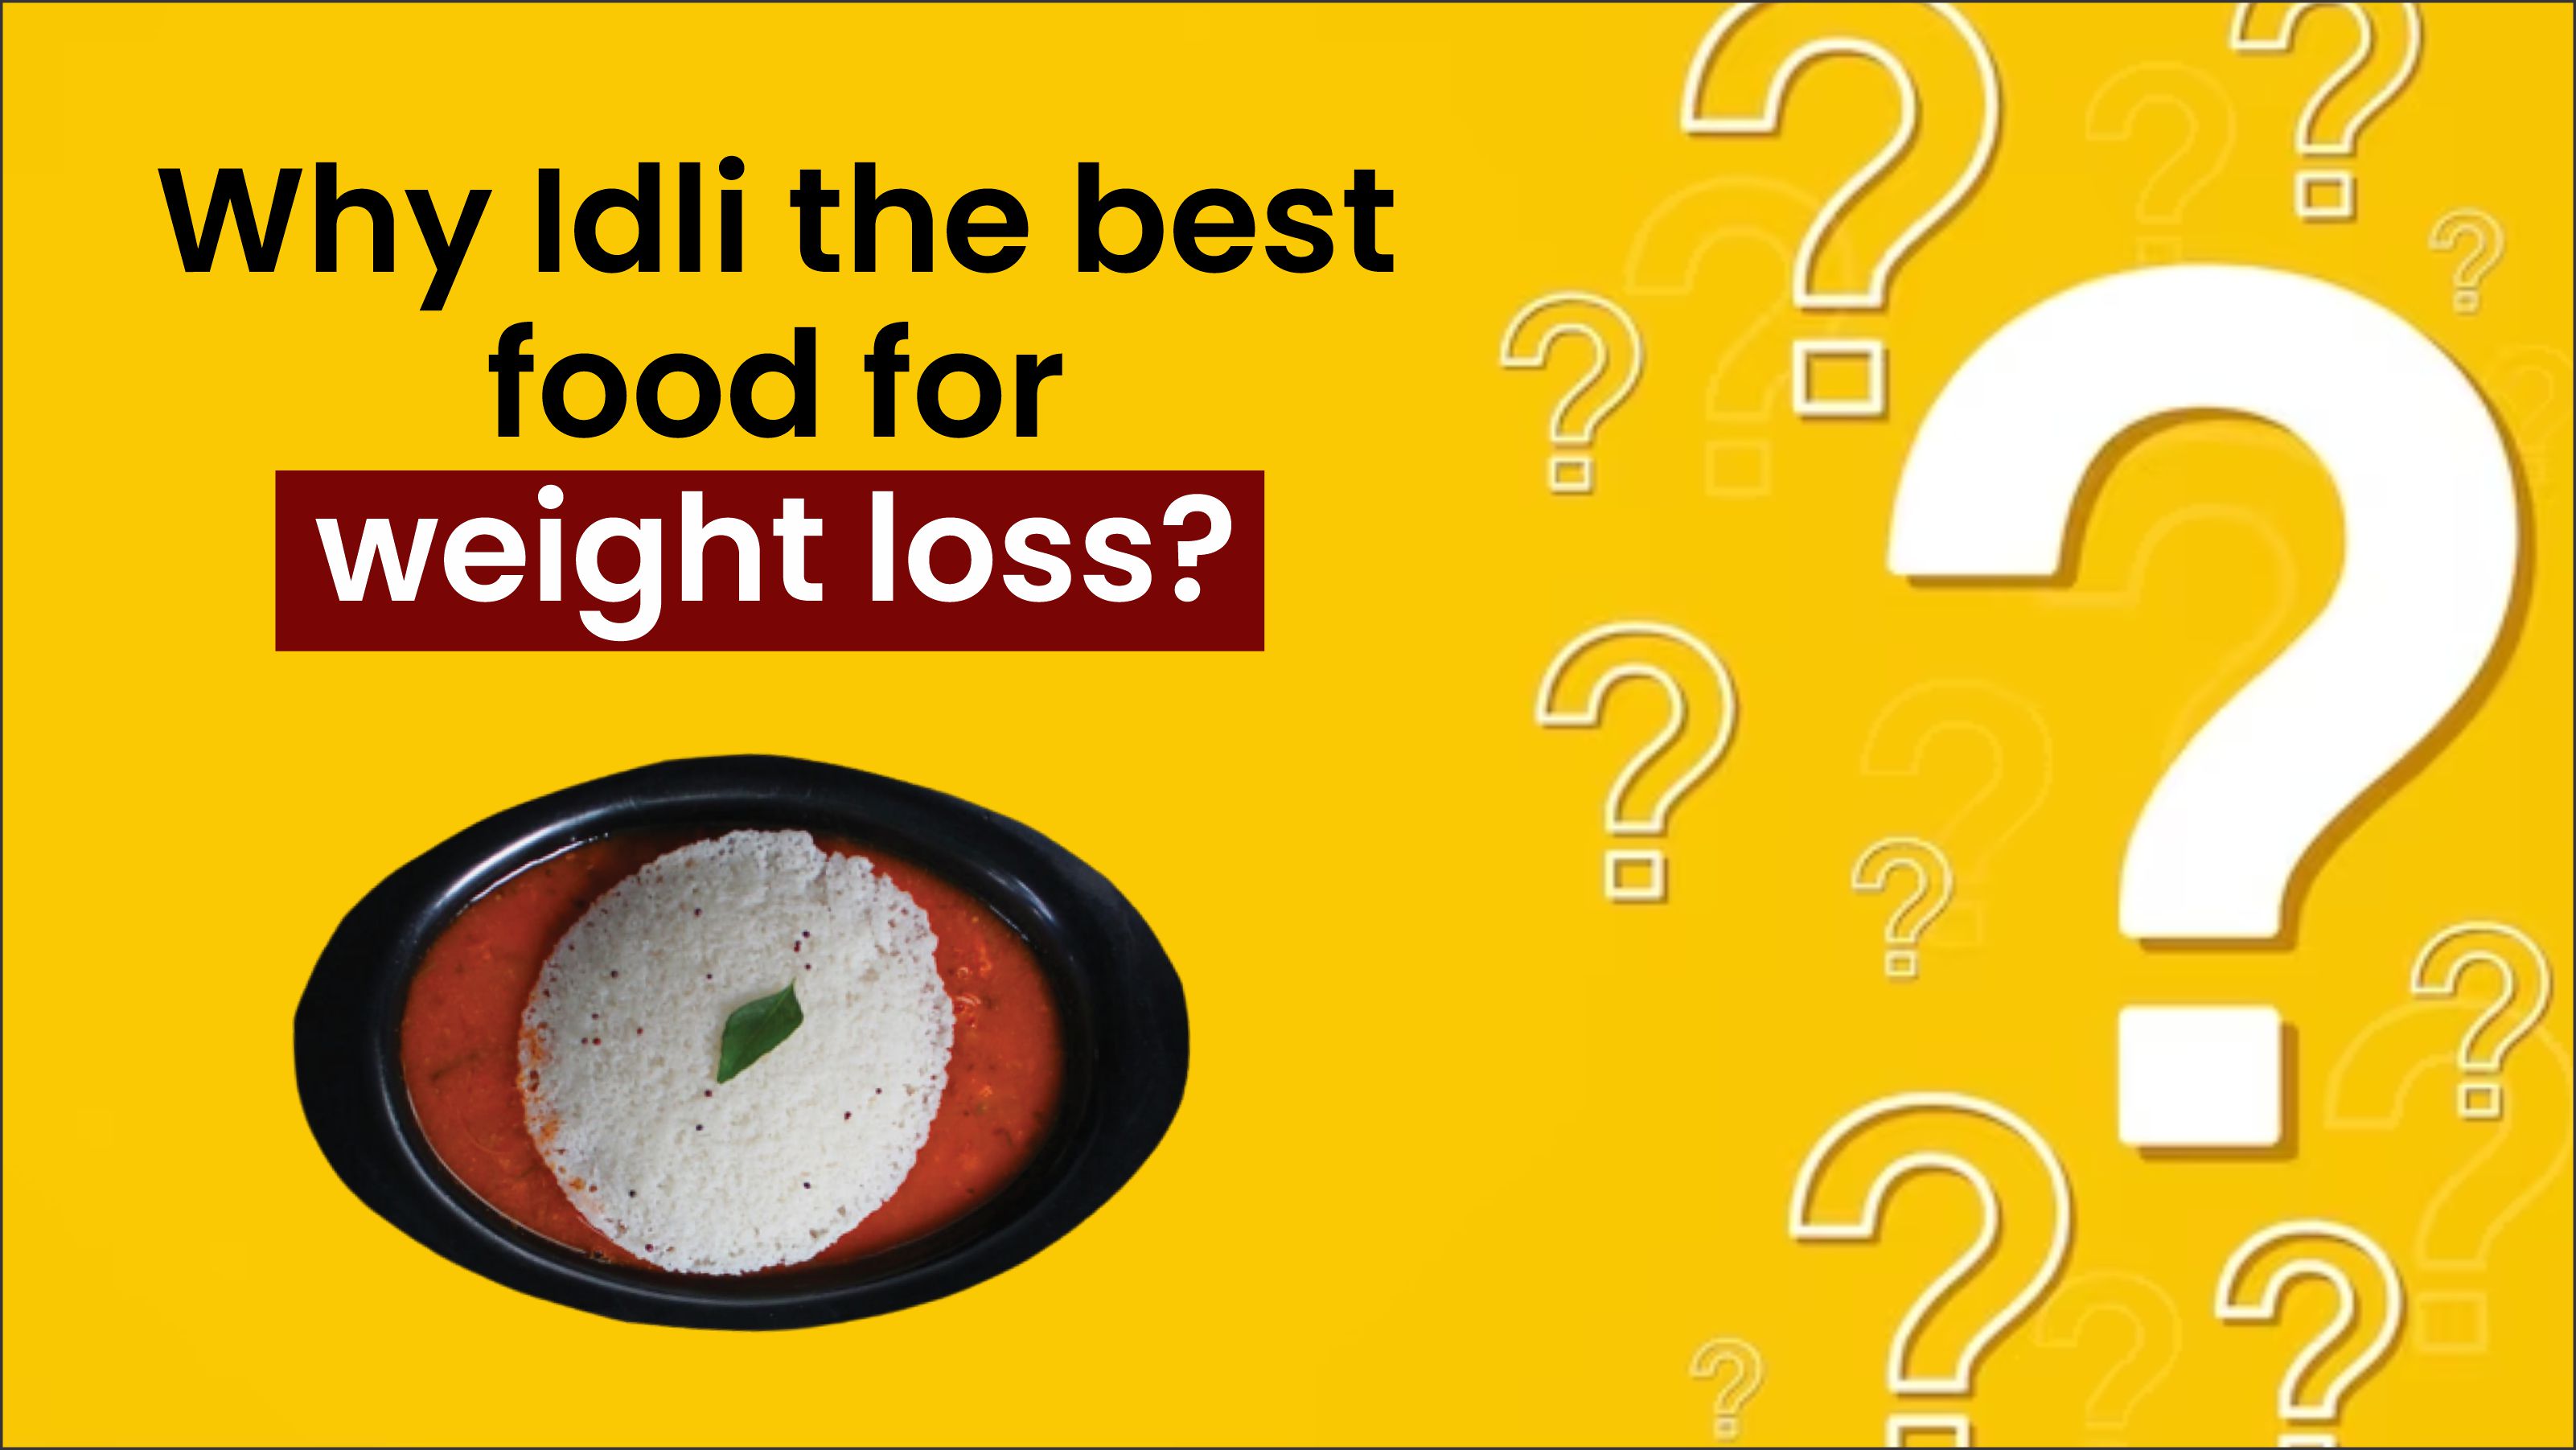 Why Idli the best food for weight loss?